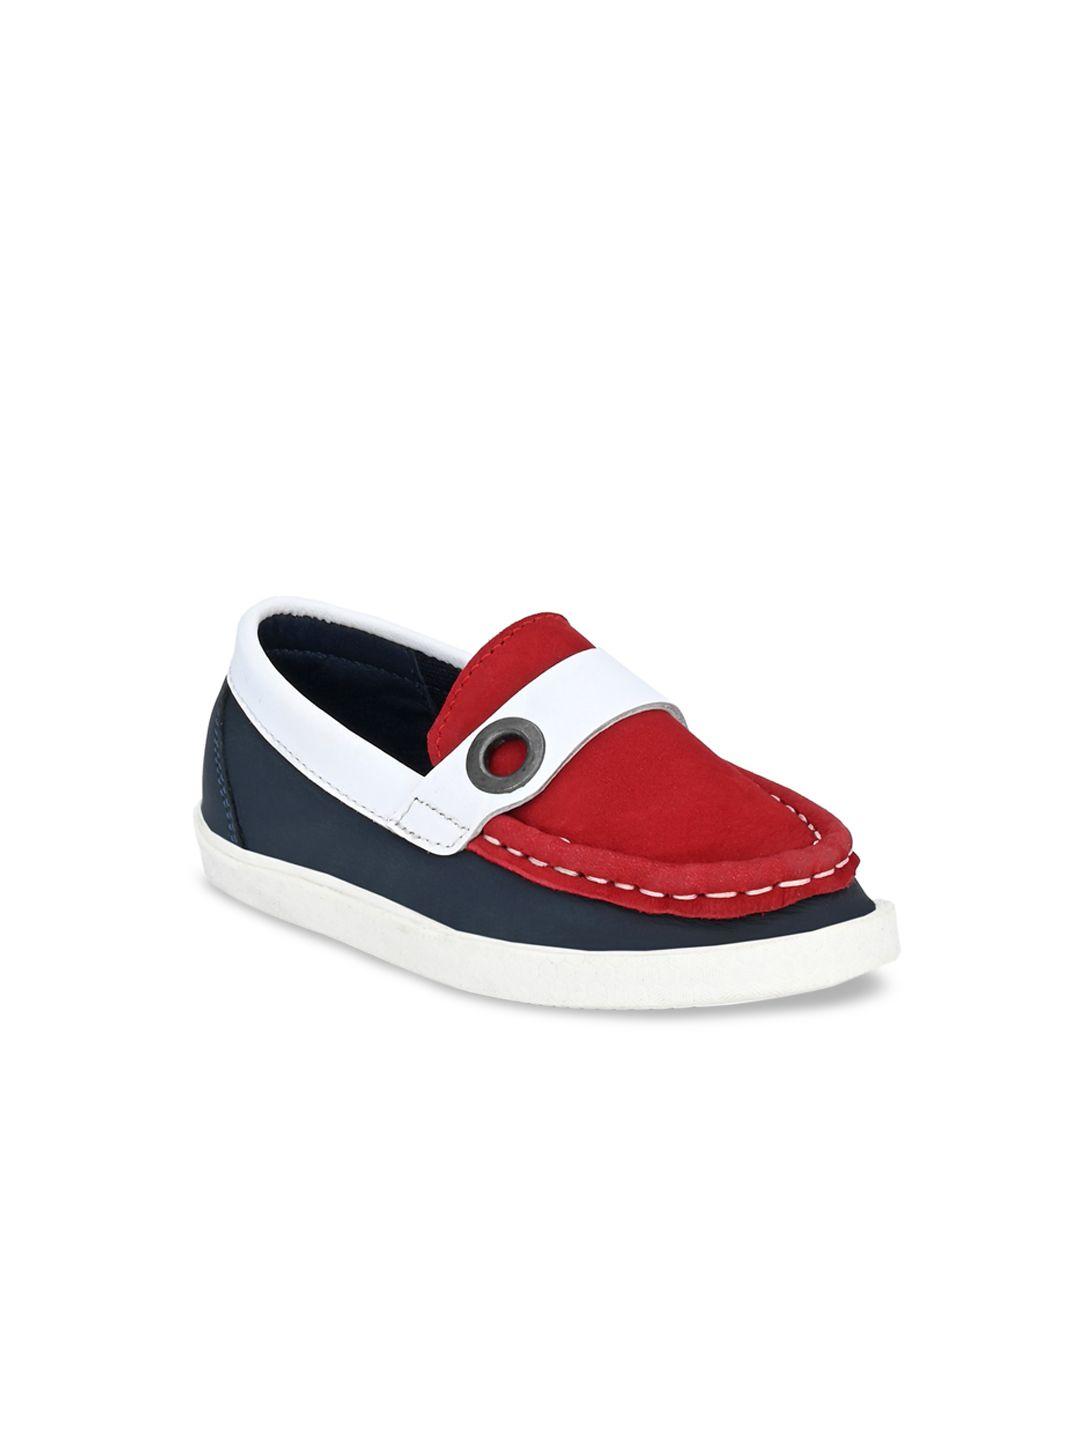 tuskey boys red leather loafers